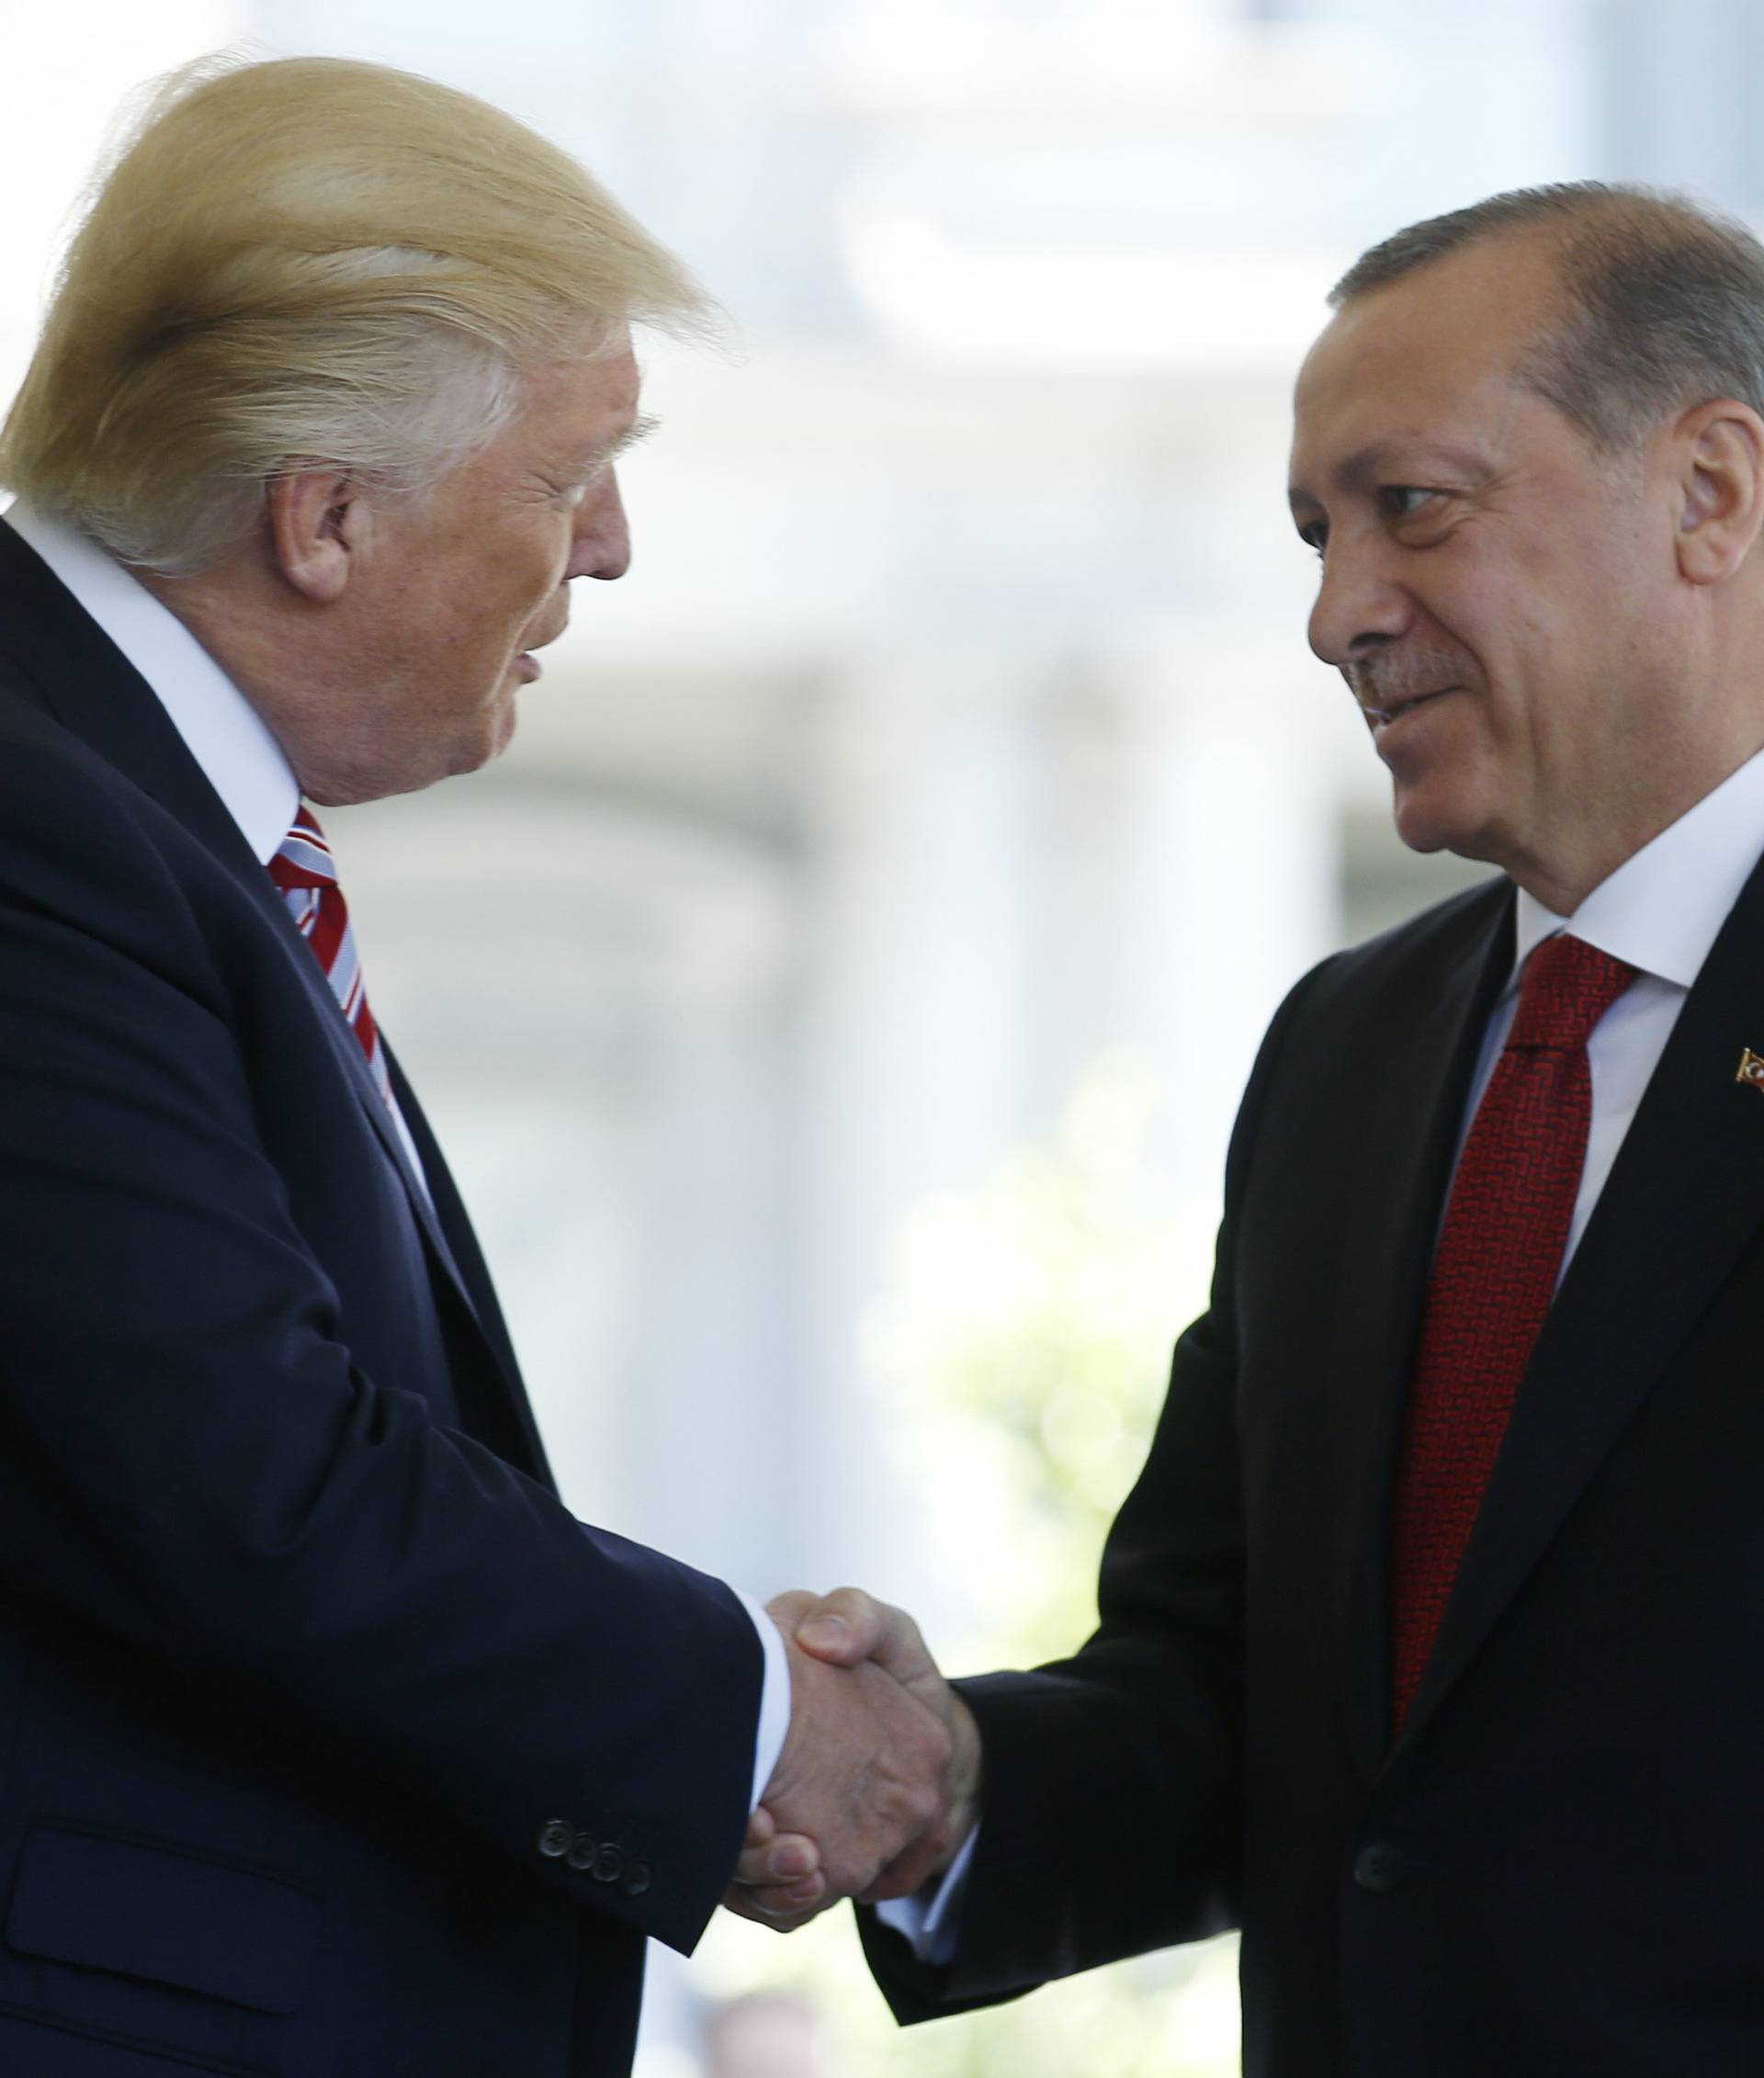 President Trump greets Turkey's President Erdogan at the entrance to the West Wing of the White House in Washington